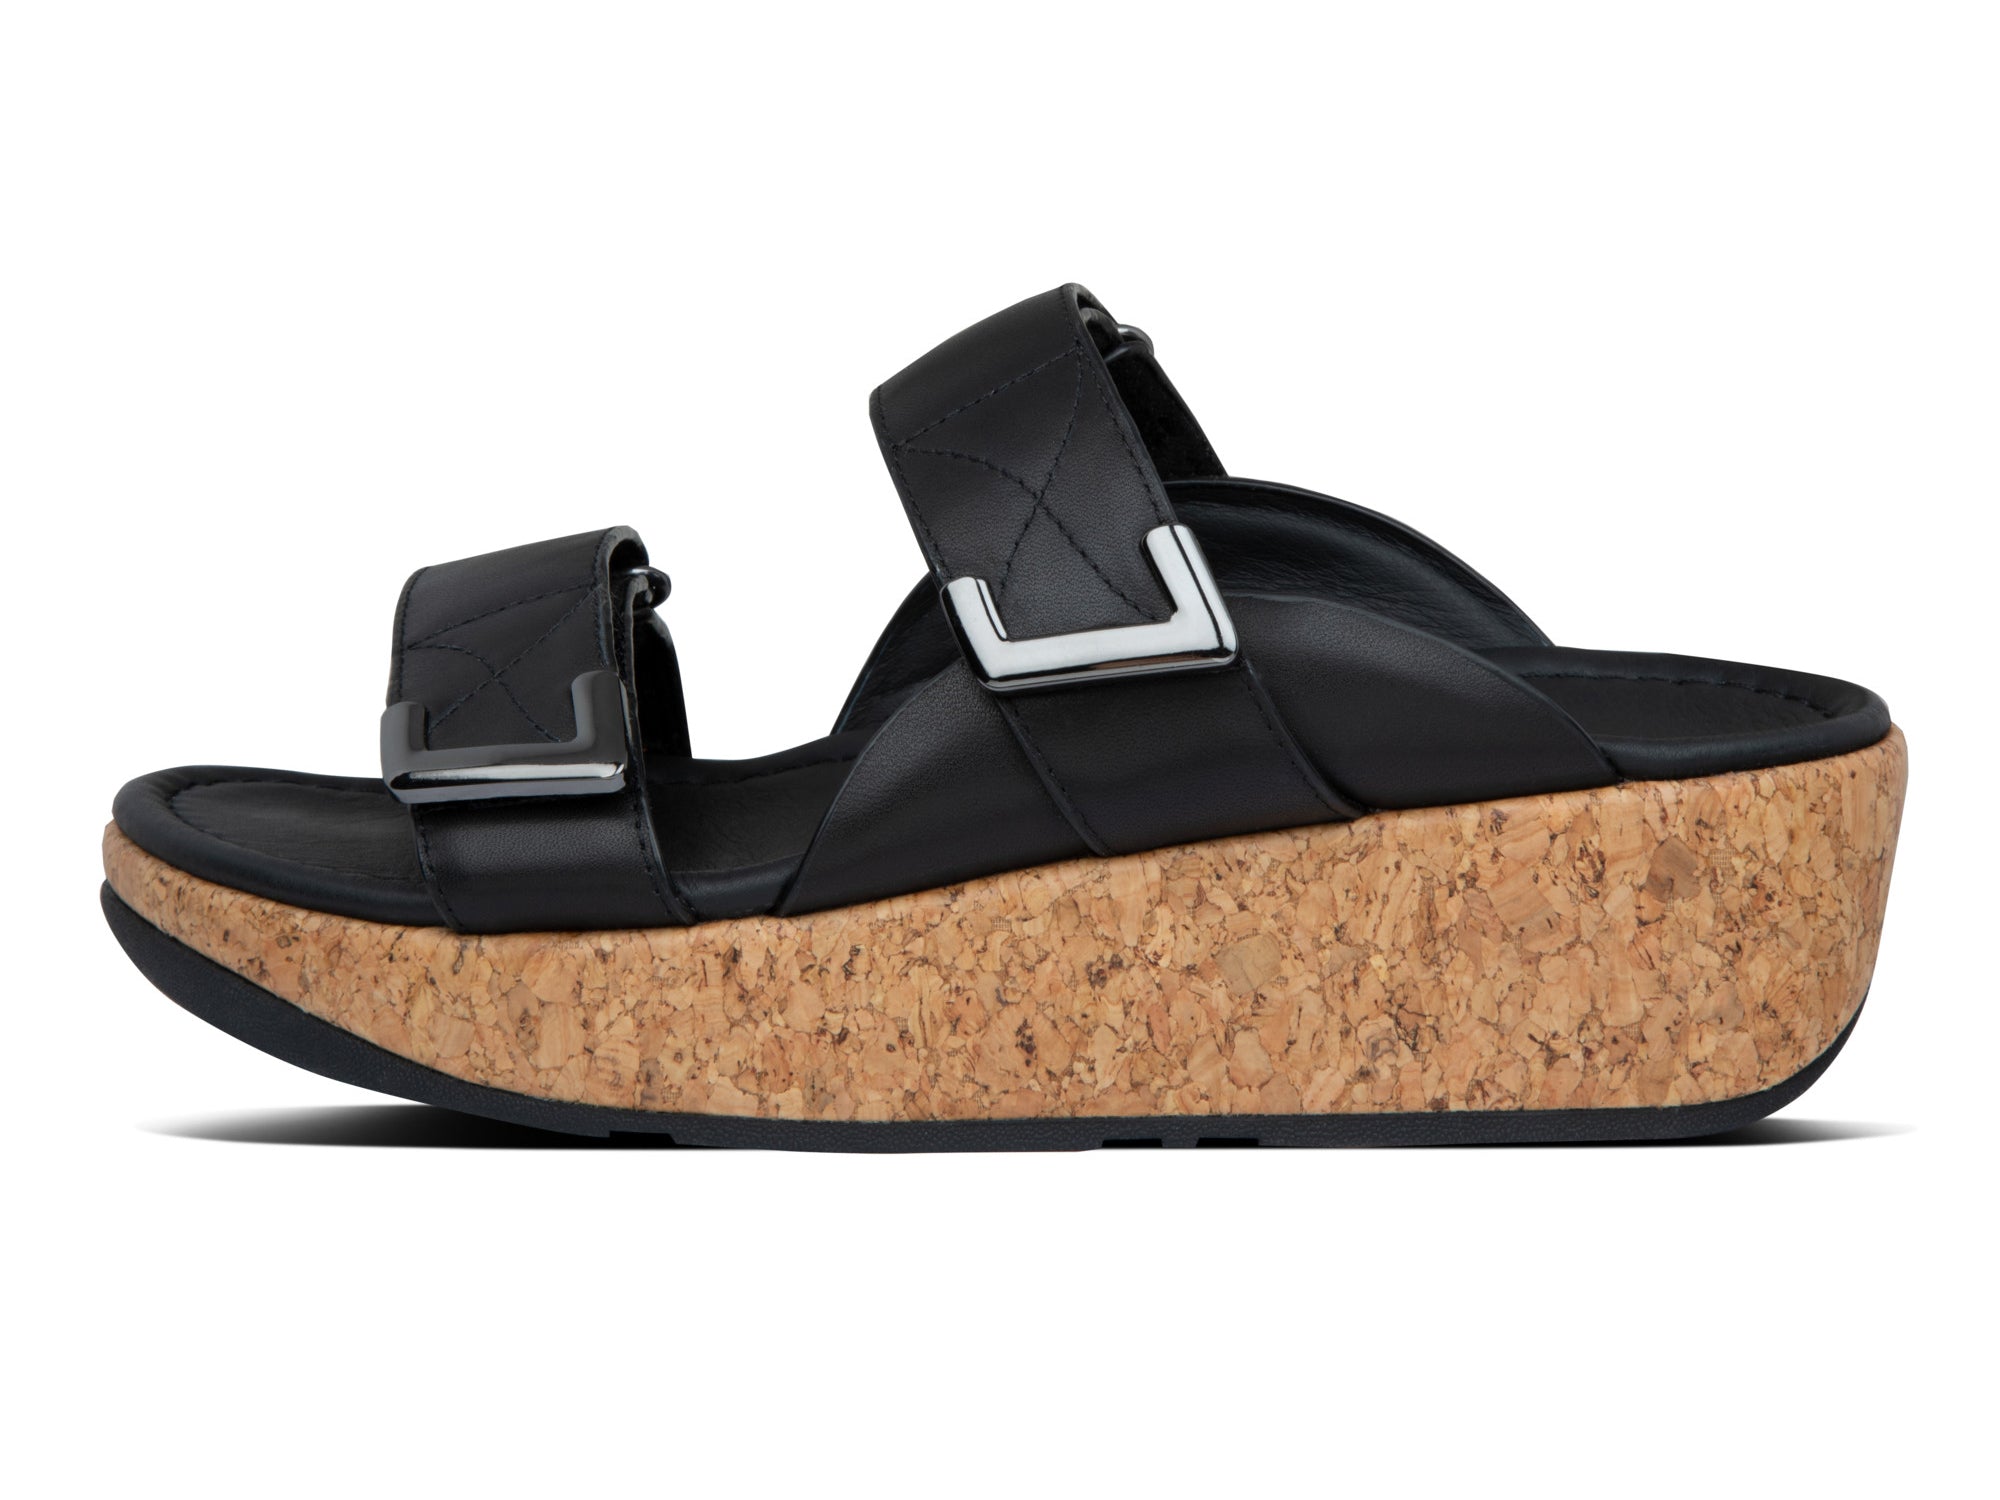 Women's FitFlop Remi Adjustable Slides Sandal in All Black from the side